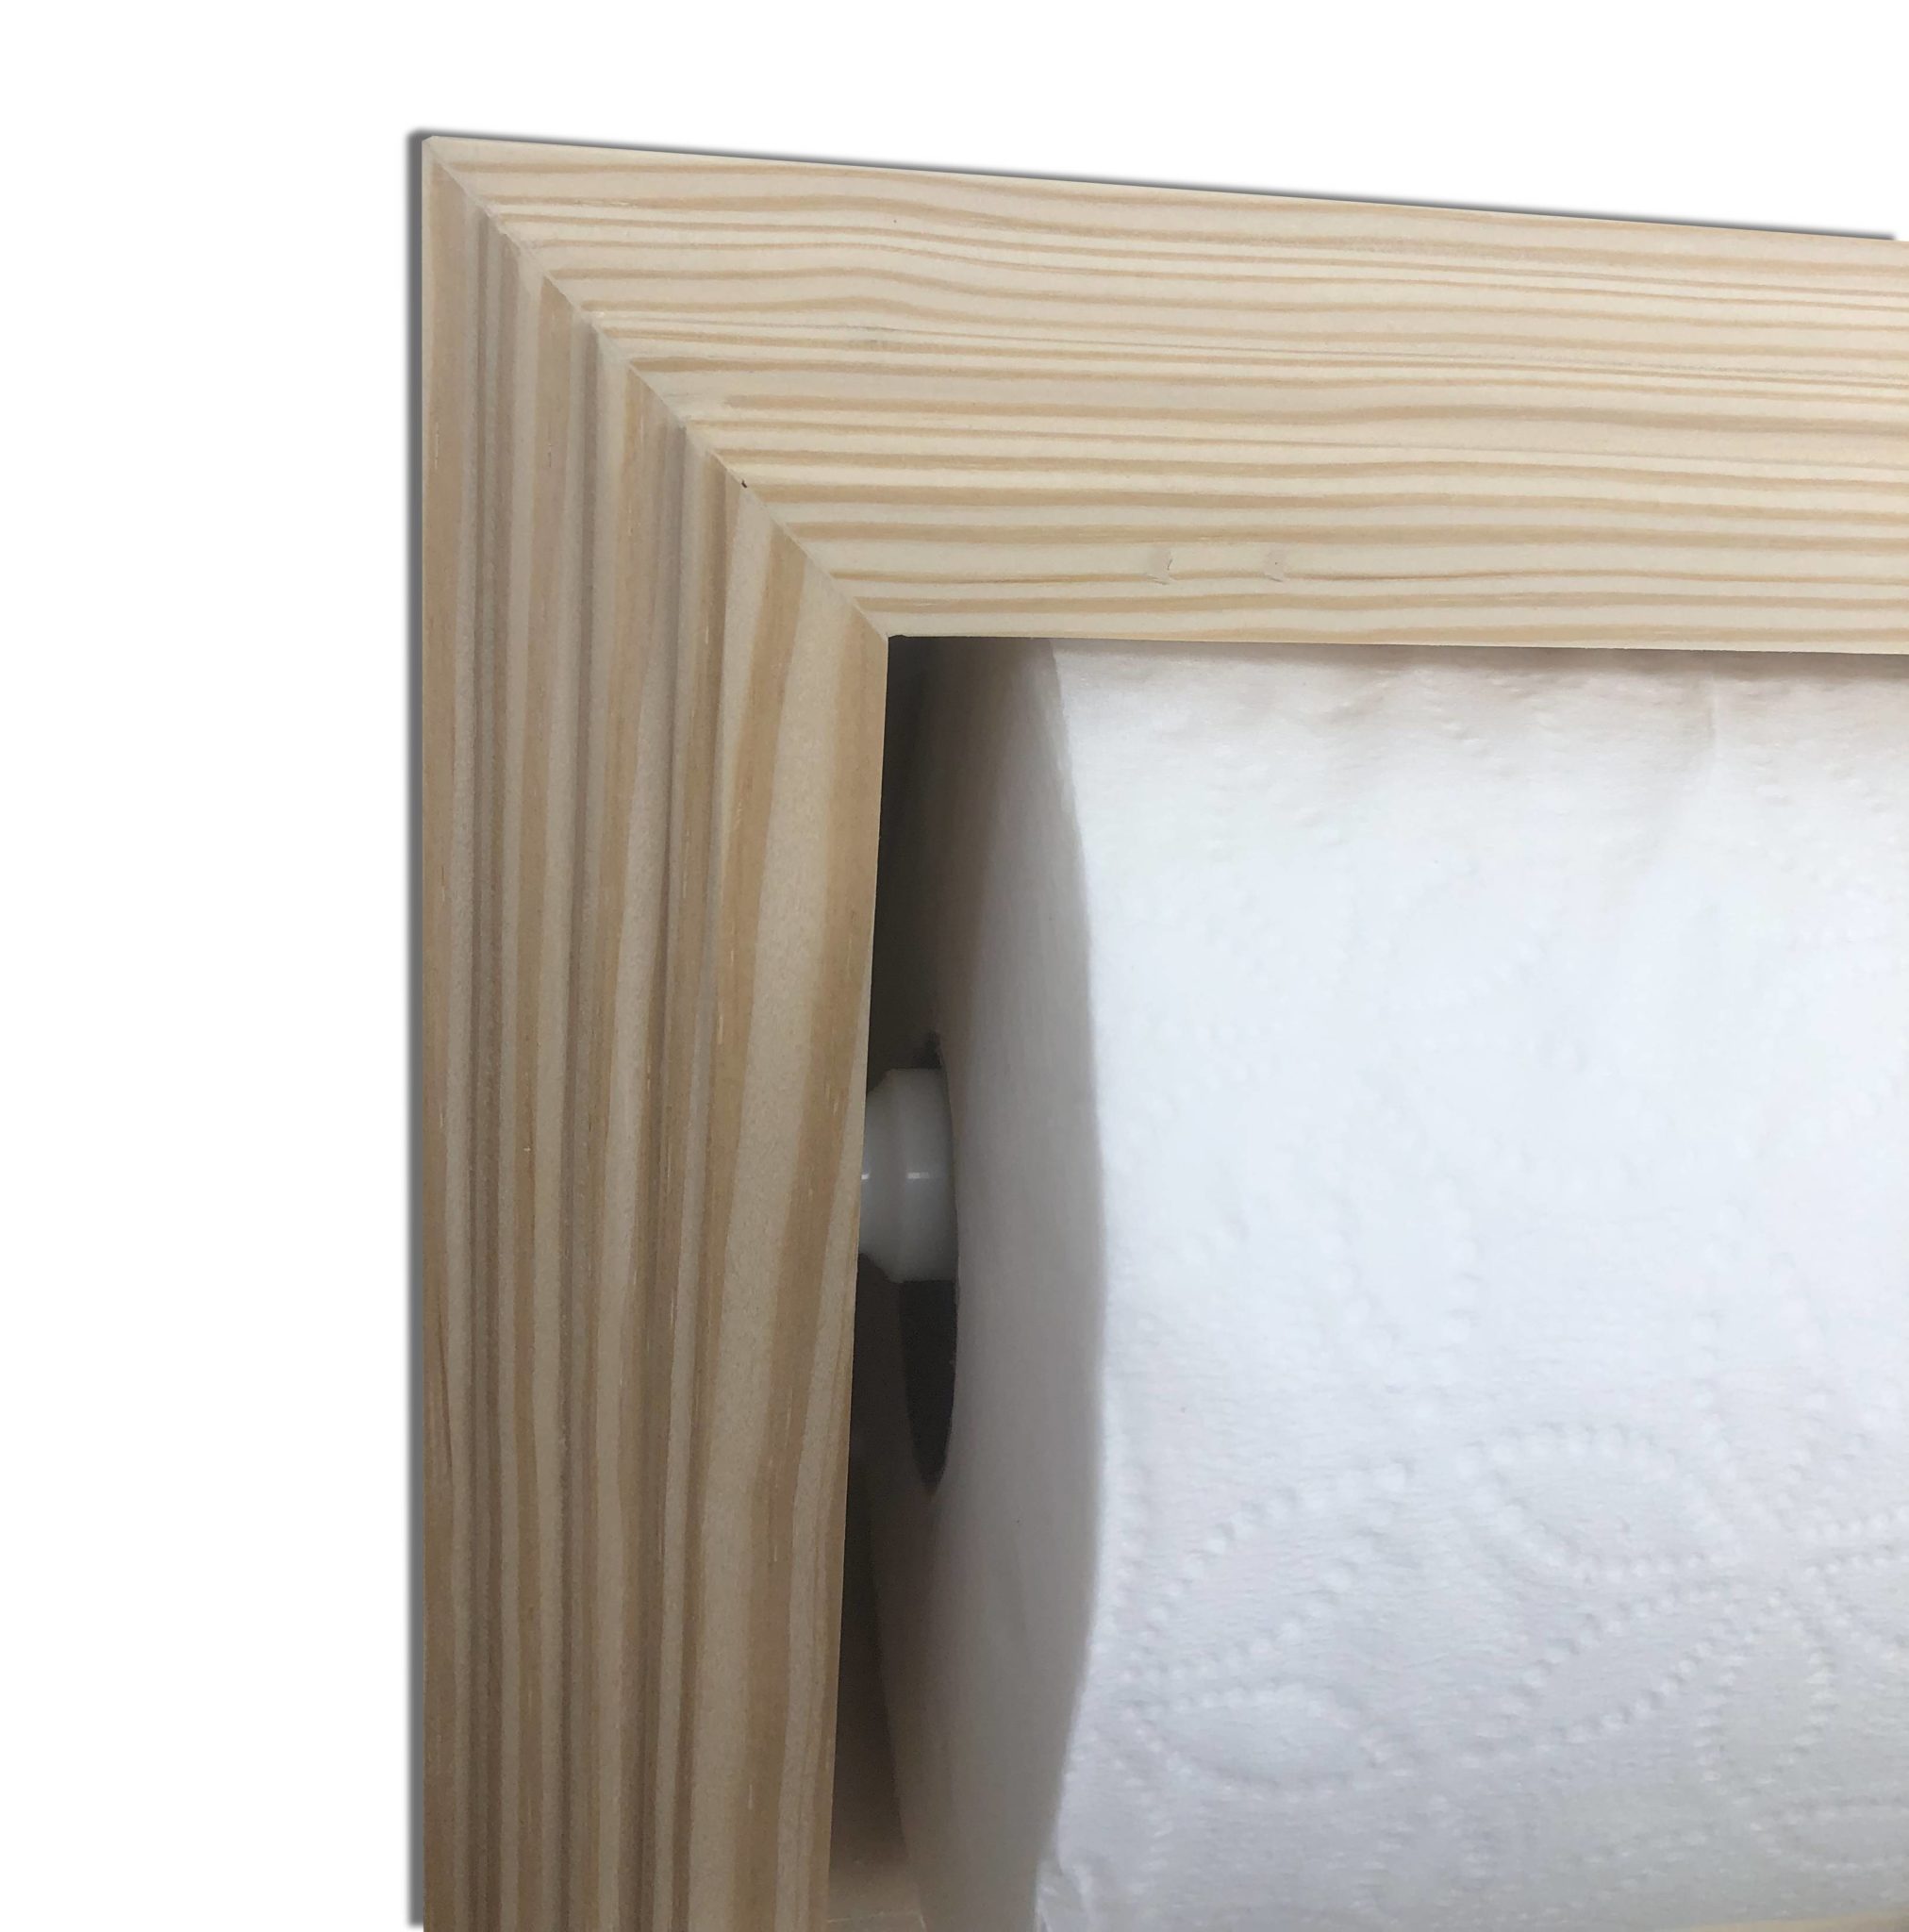 Wooden Toilet Paper Holder With Phone Shelf Solid Wood Wall Mount Storage  Rack